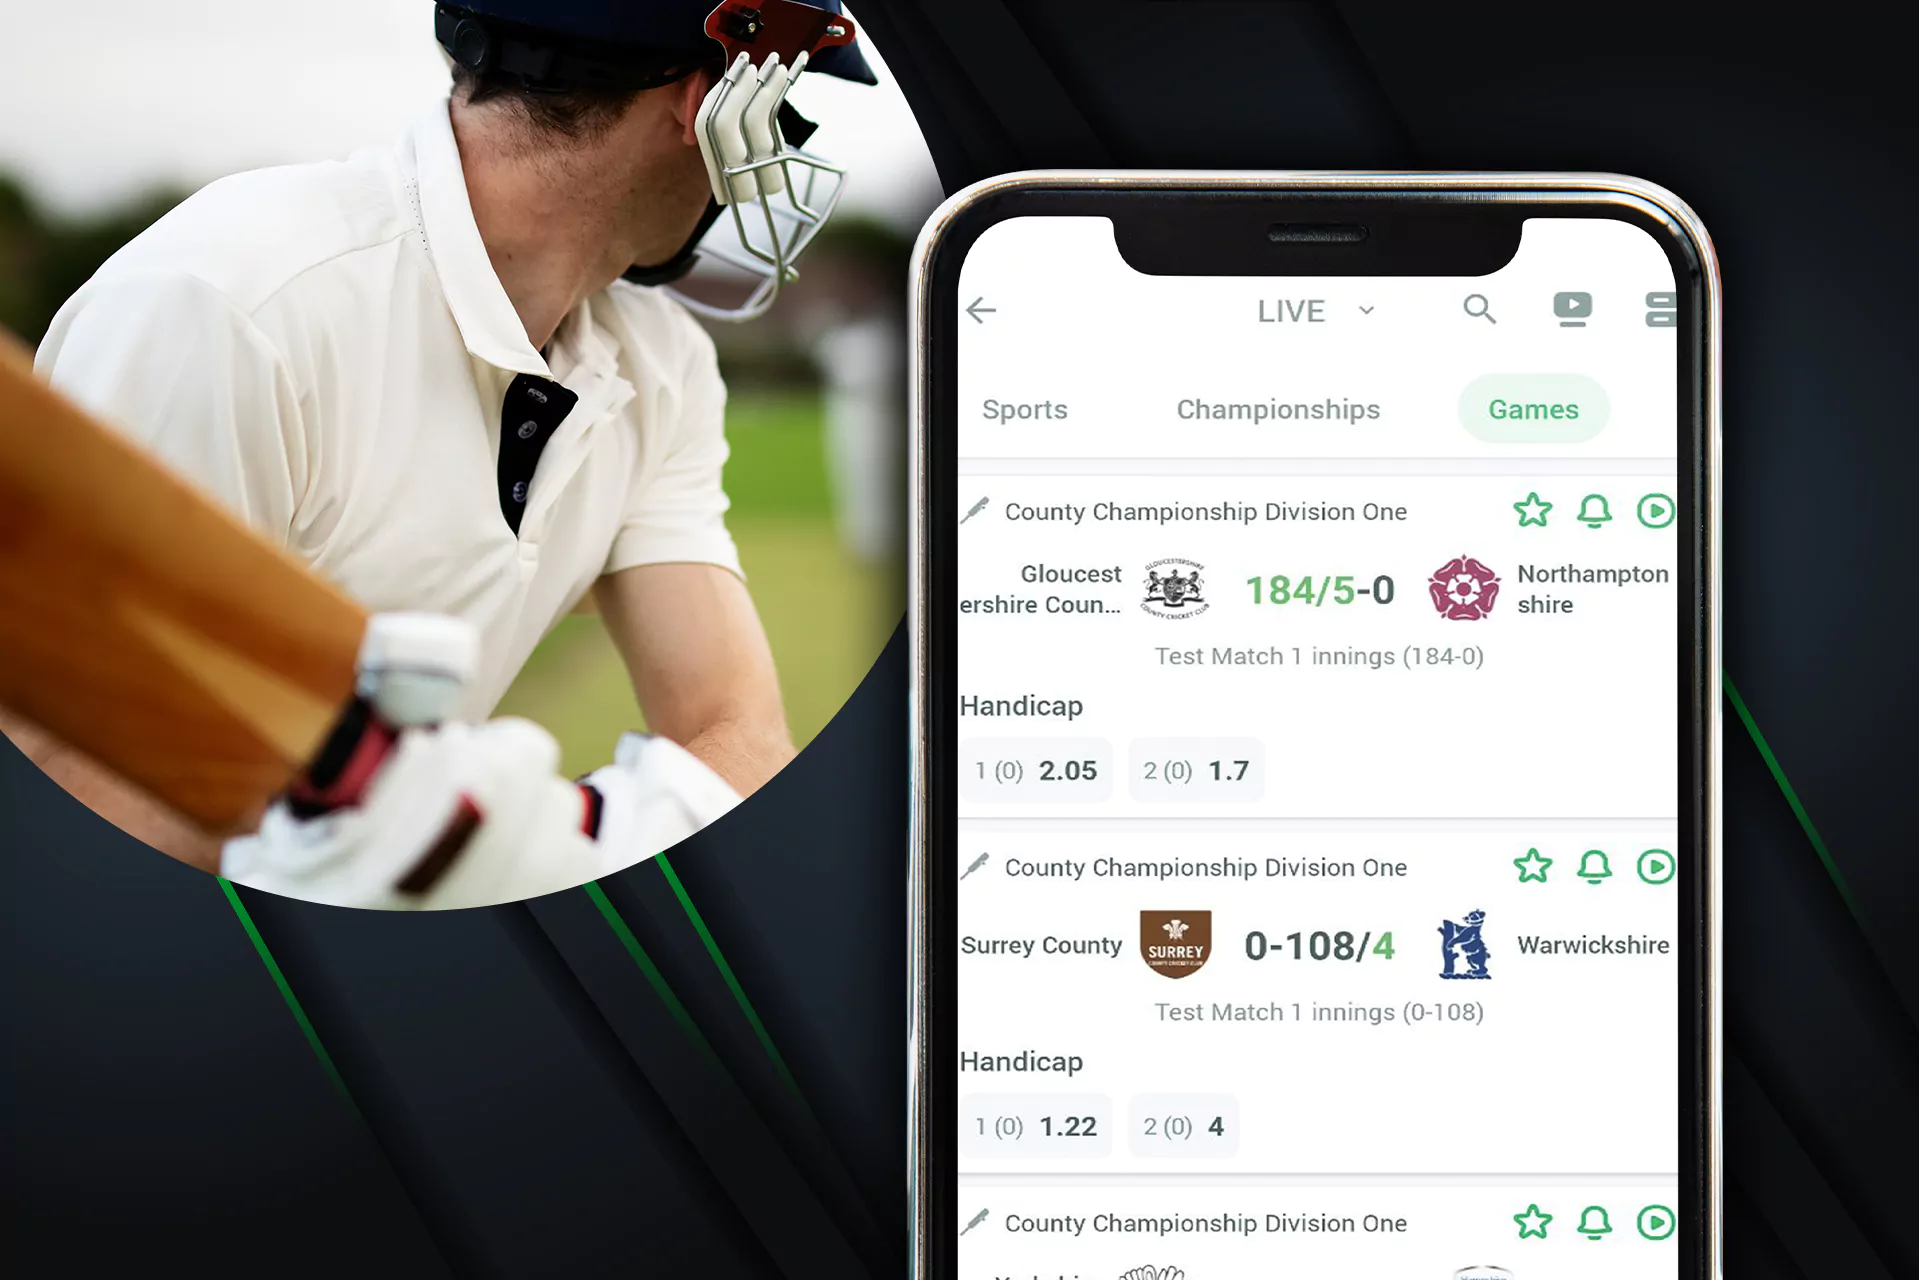 Place bets on cricket right in the app.